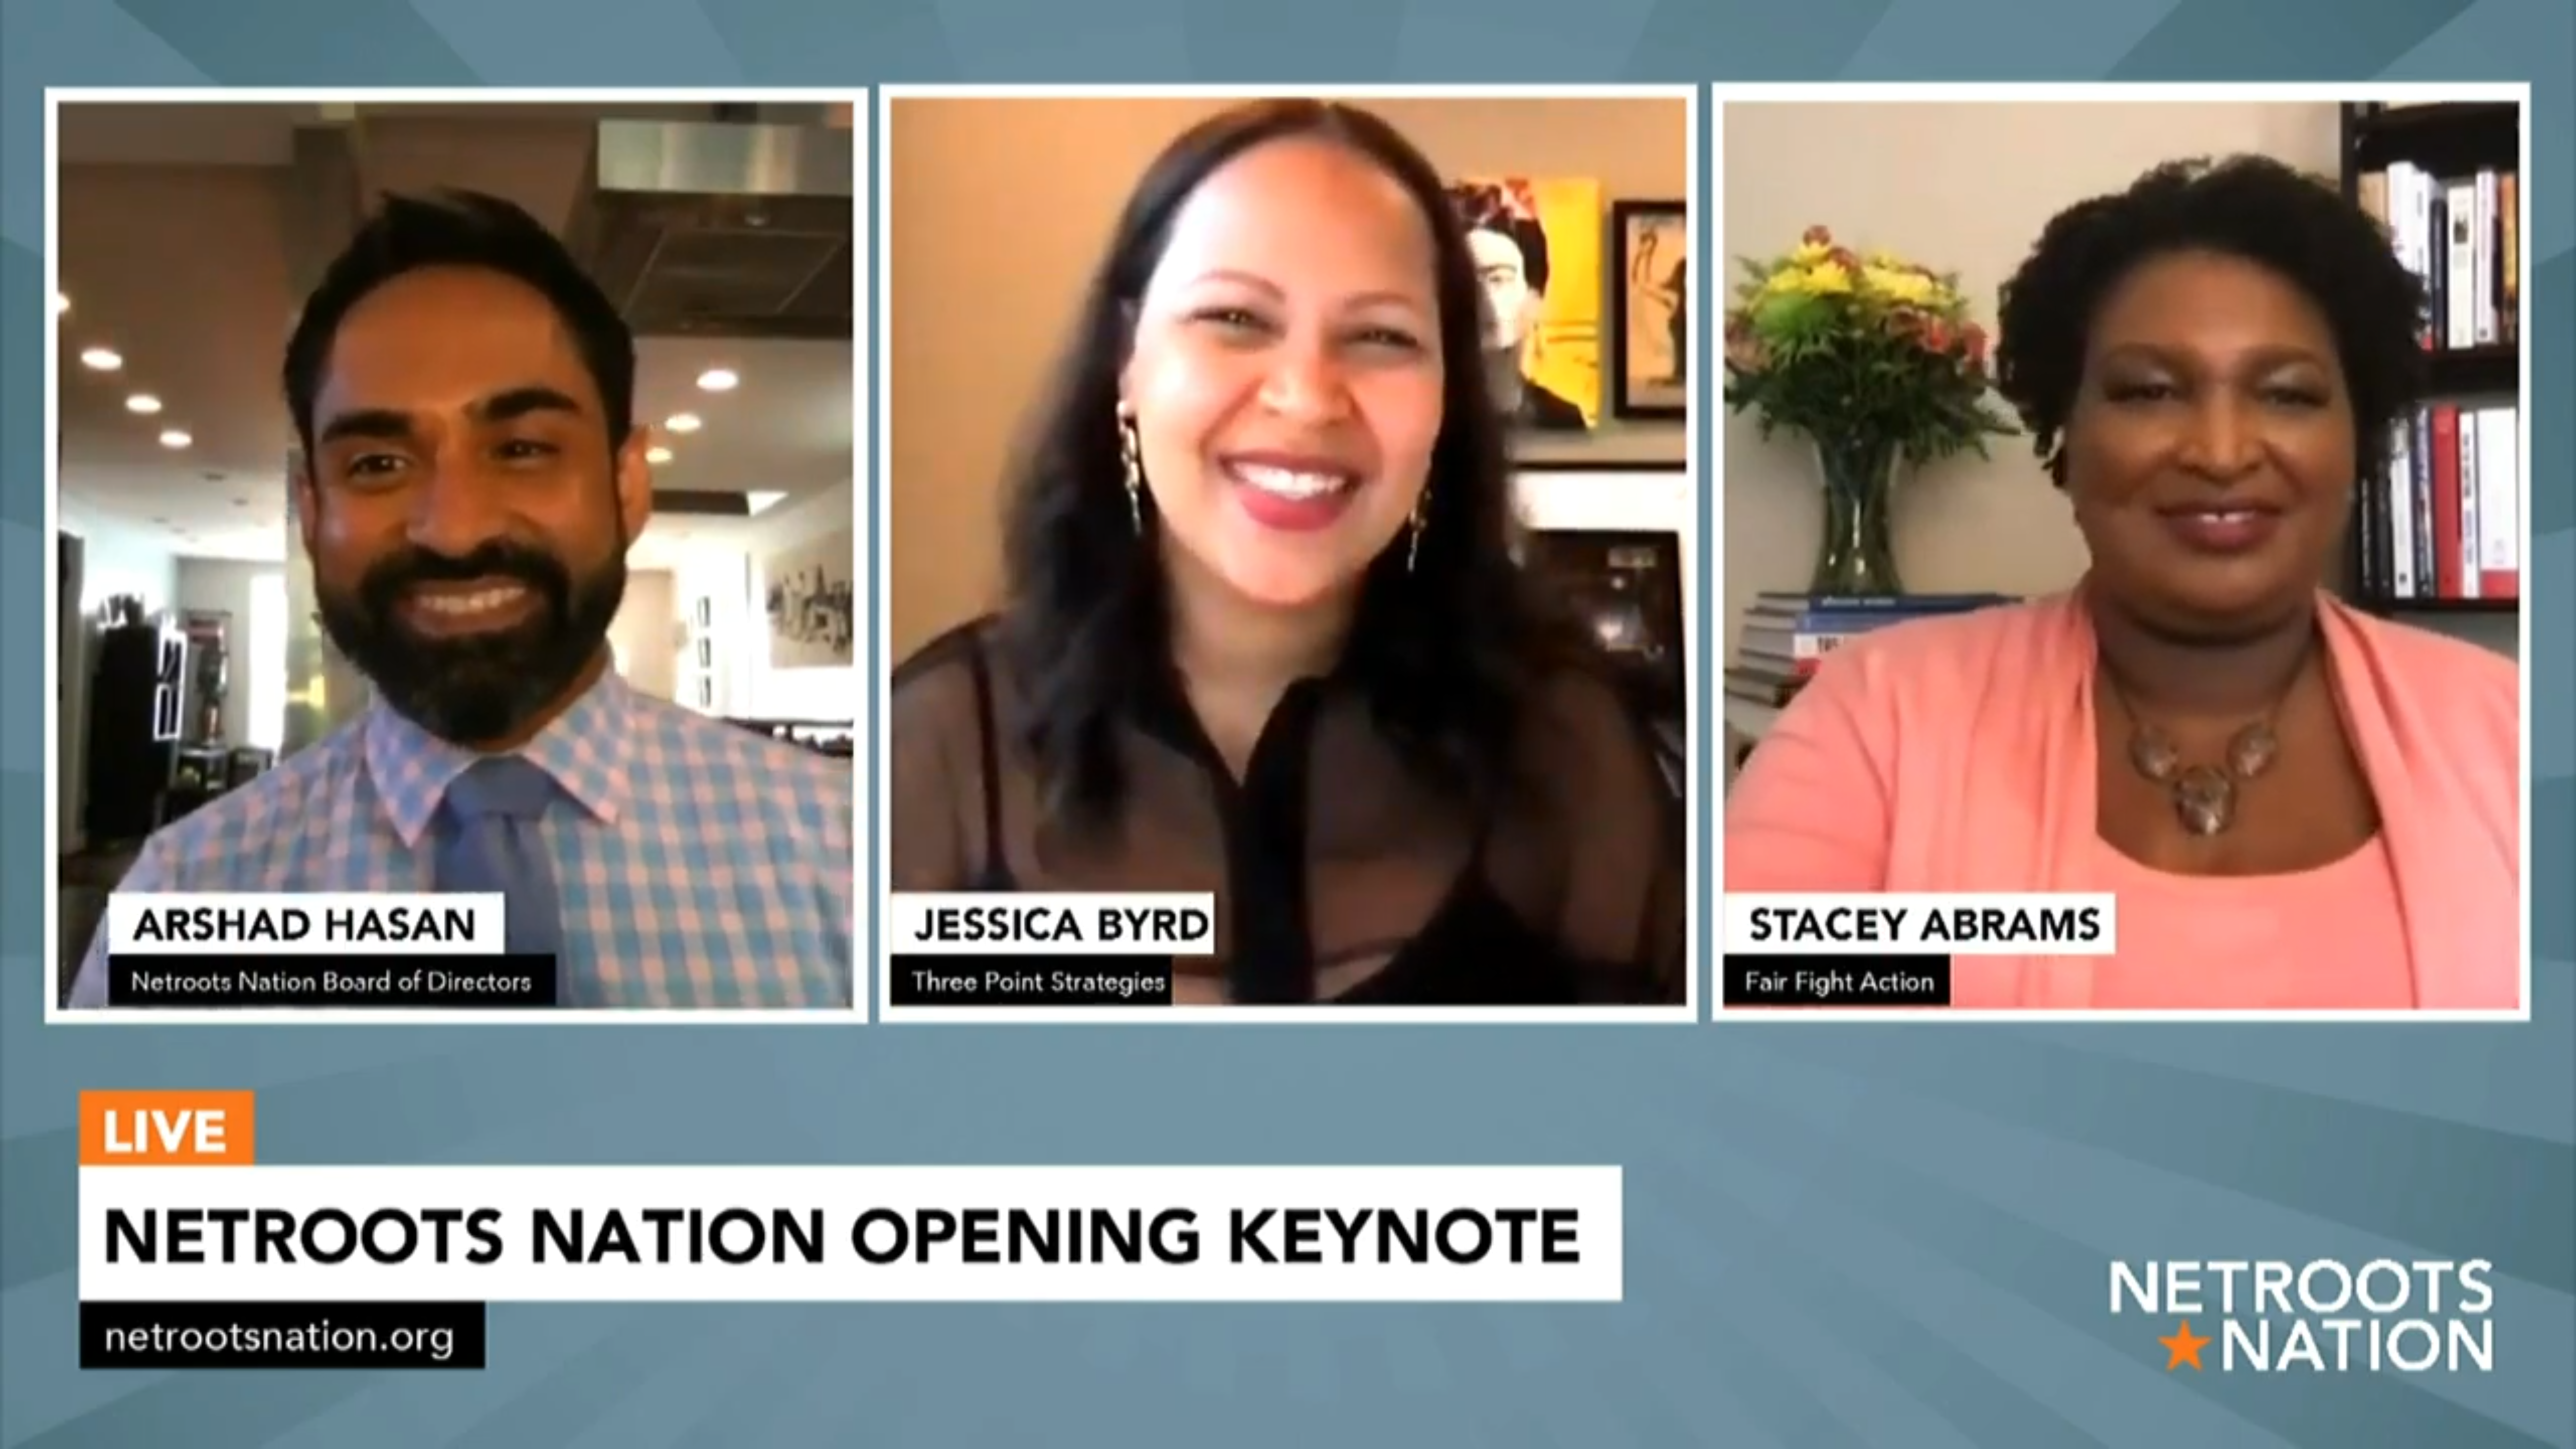 Speakers at the 2020 Netroots Nation opening keynote